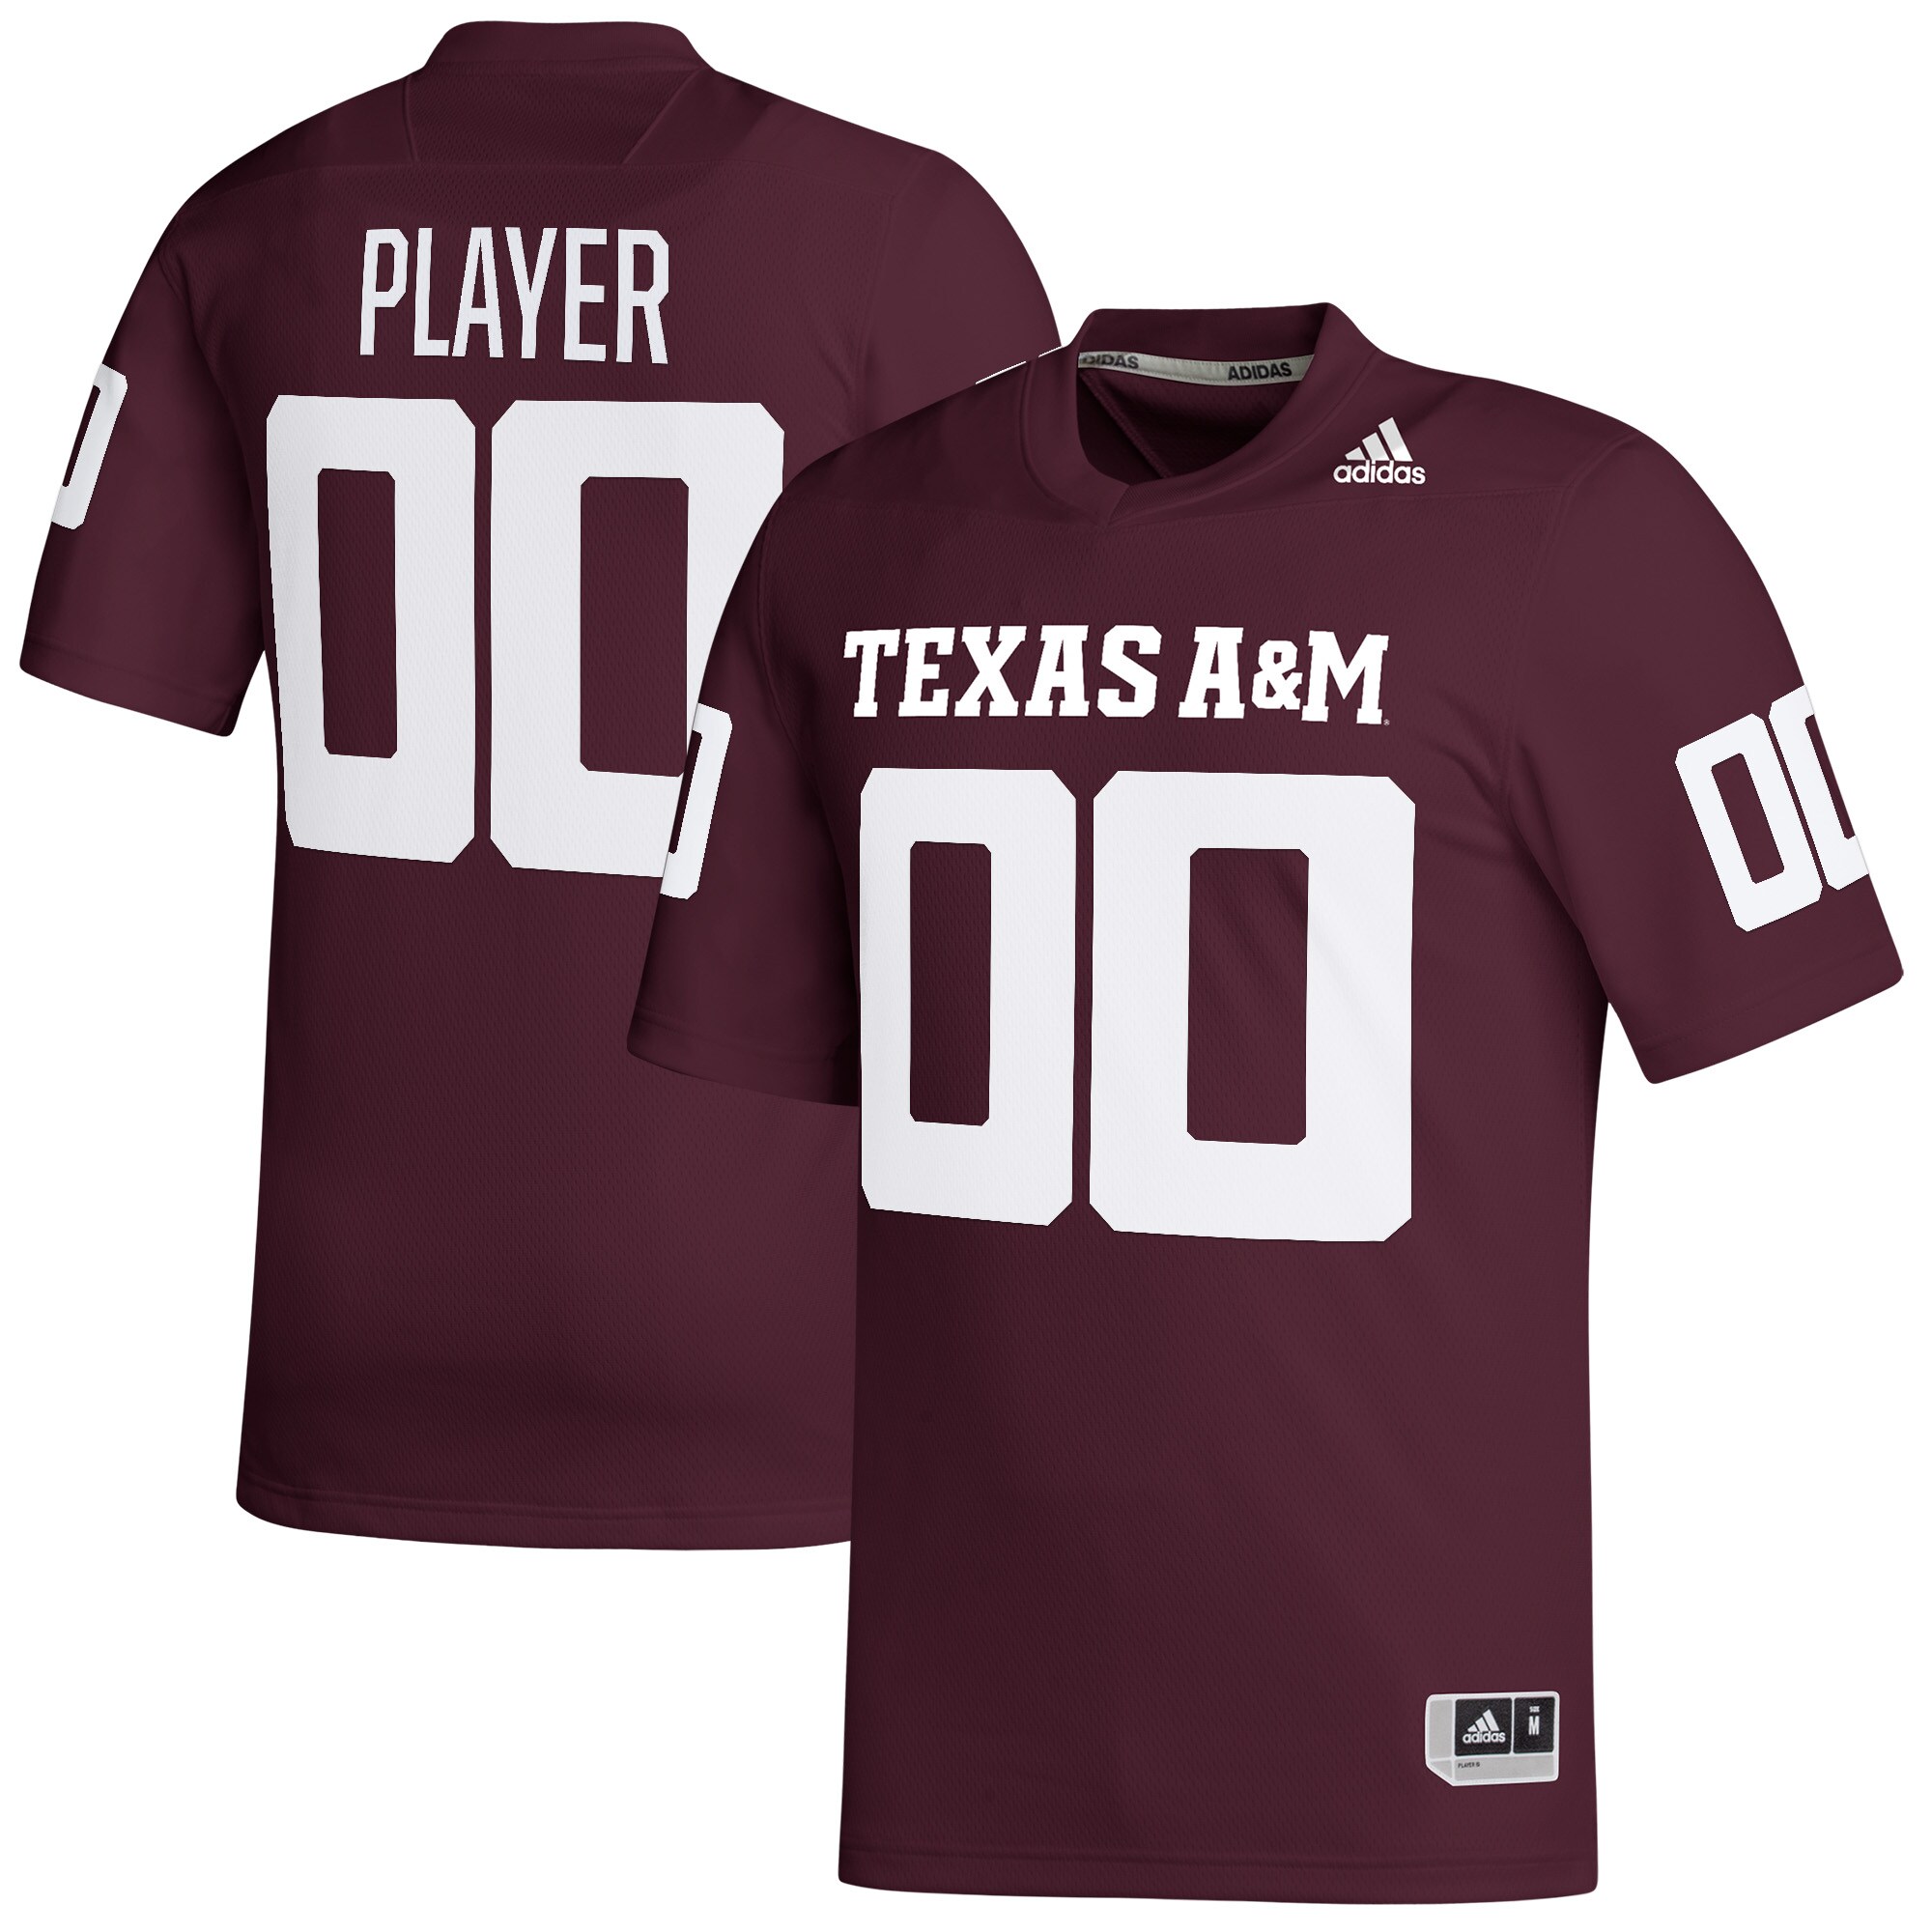 Texas A&M Aggies   Pick-A-Player Nil Replica  Football Shirts Jersey - Maroon For Youth Women Men